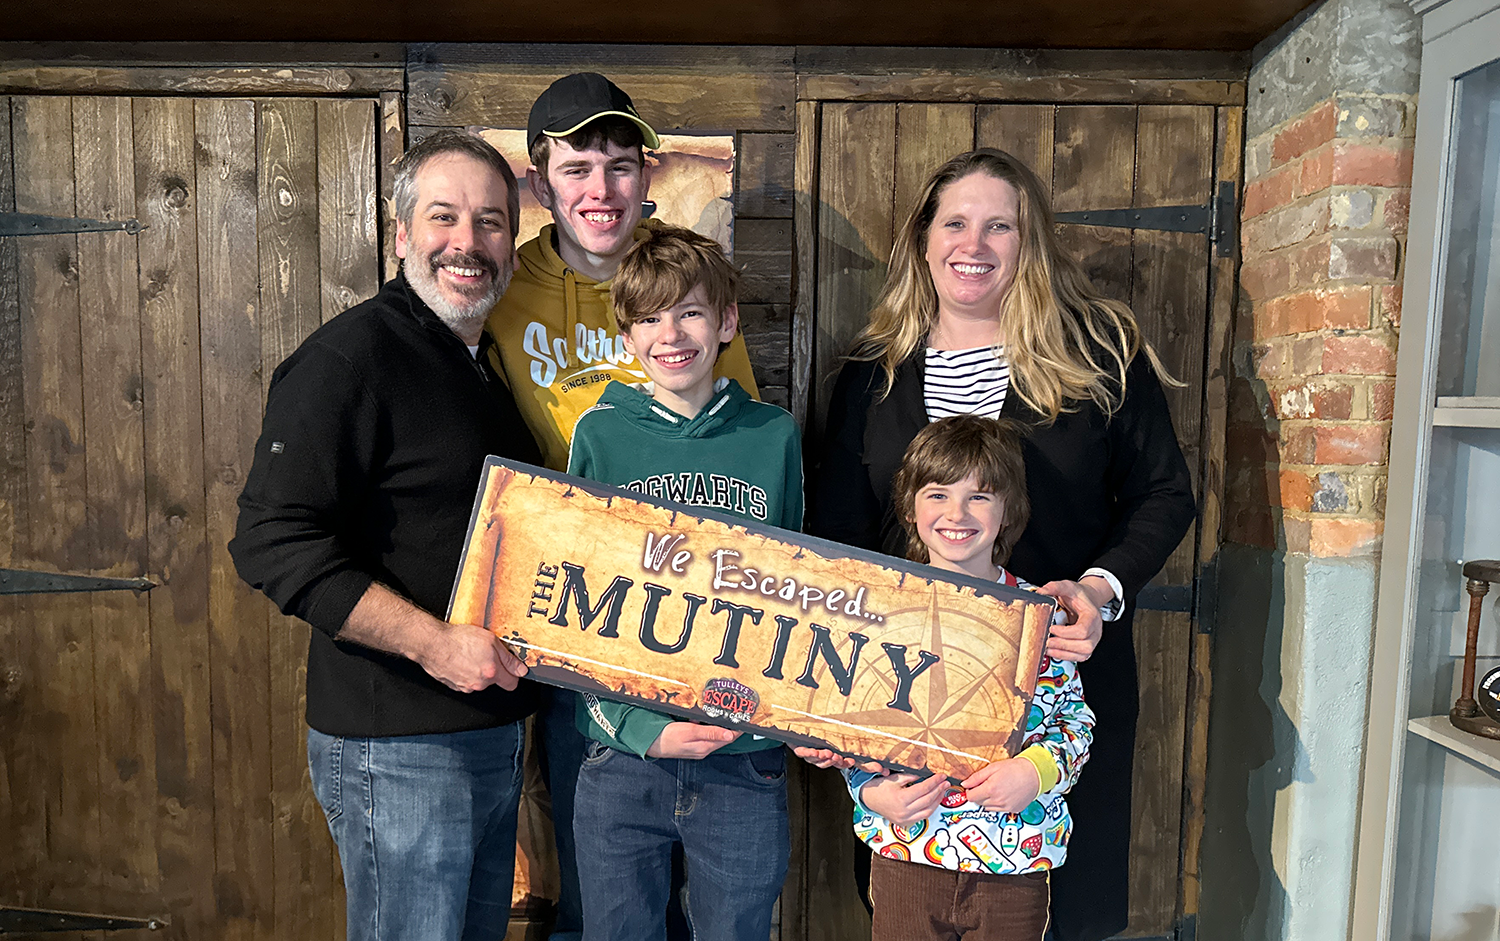 Tulleys Mutiny Escape Room Review, We Escaped landscape